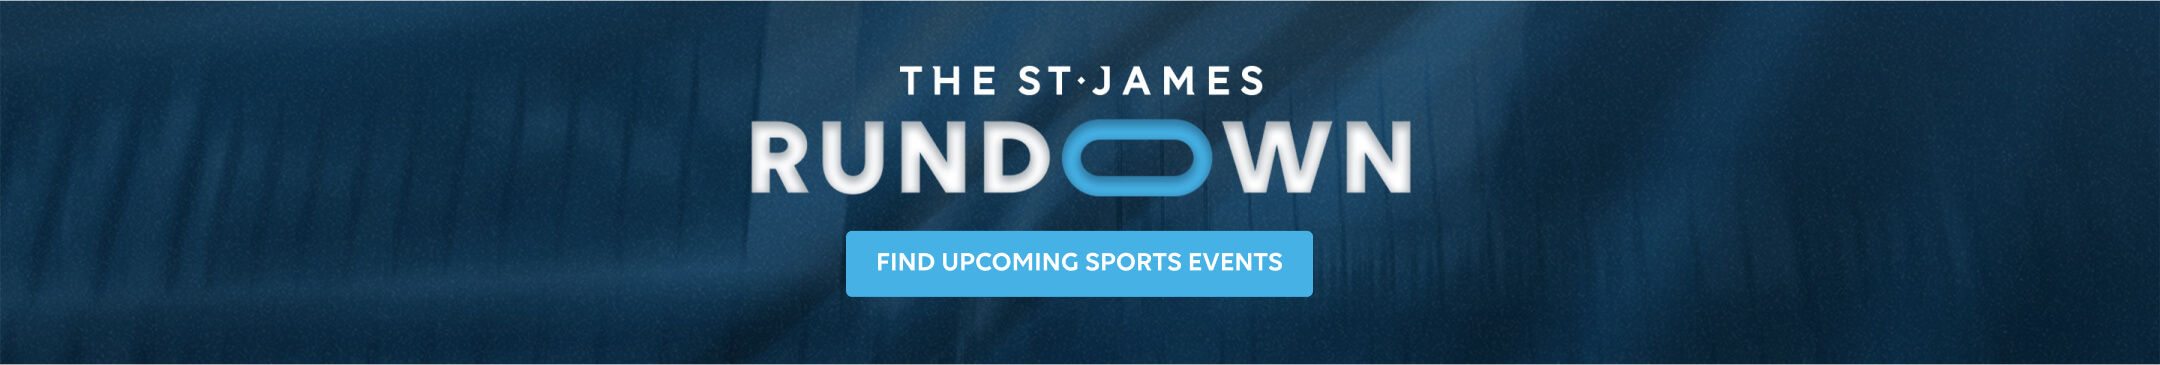 The Rundown of upcoming sports events